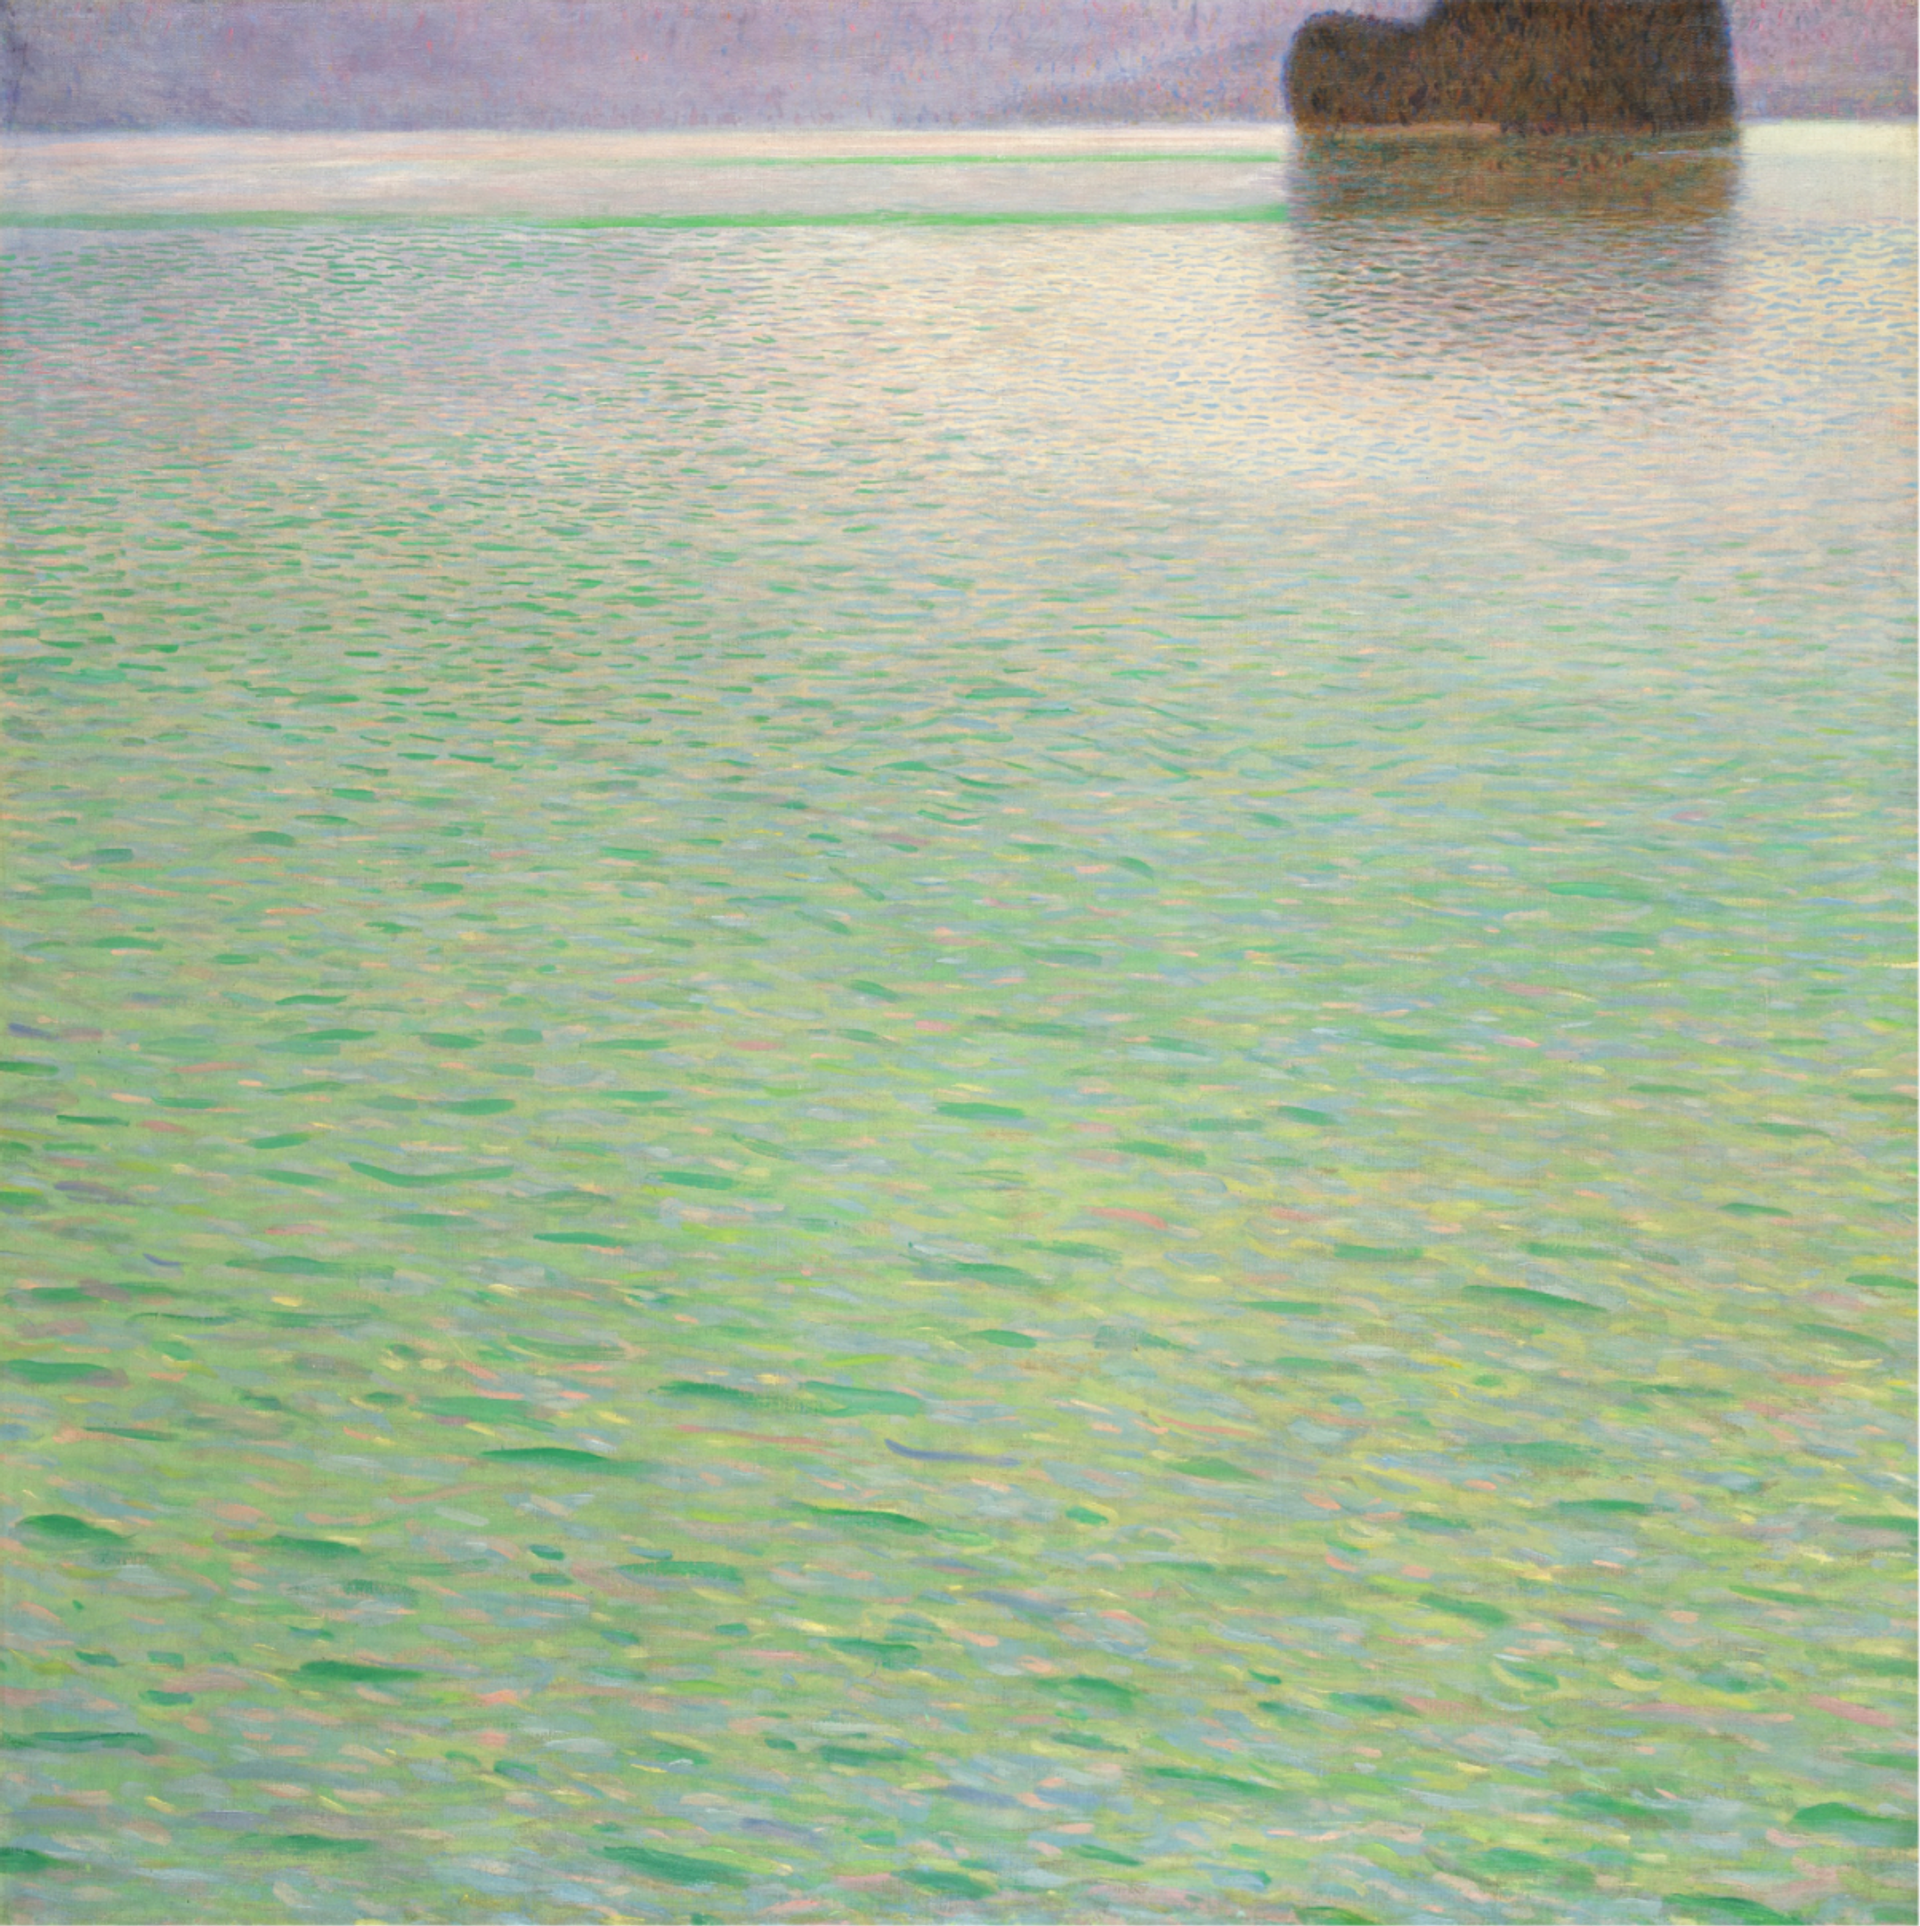 Large-scale painting by Gustav Klimt of a serene turquoise sea, capturing the natural ripples and movement of the water. Hazy sky separates the distant horizon, while a prominent cropped brown boulder protrudes in the upper far right of the work.